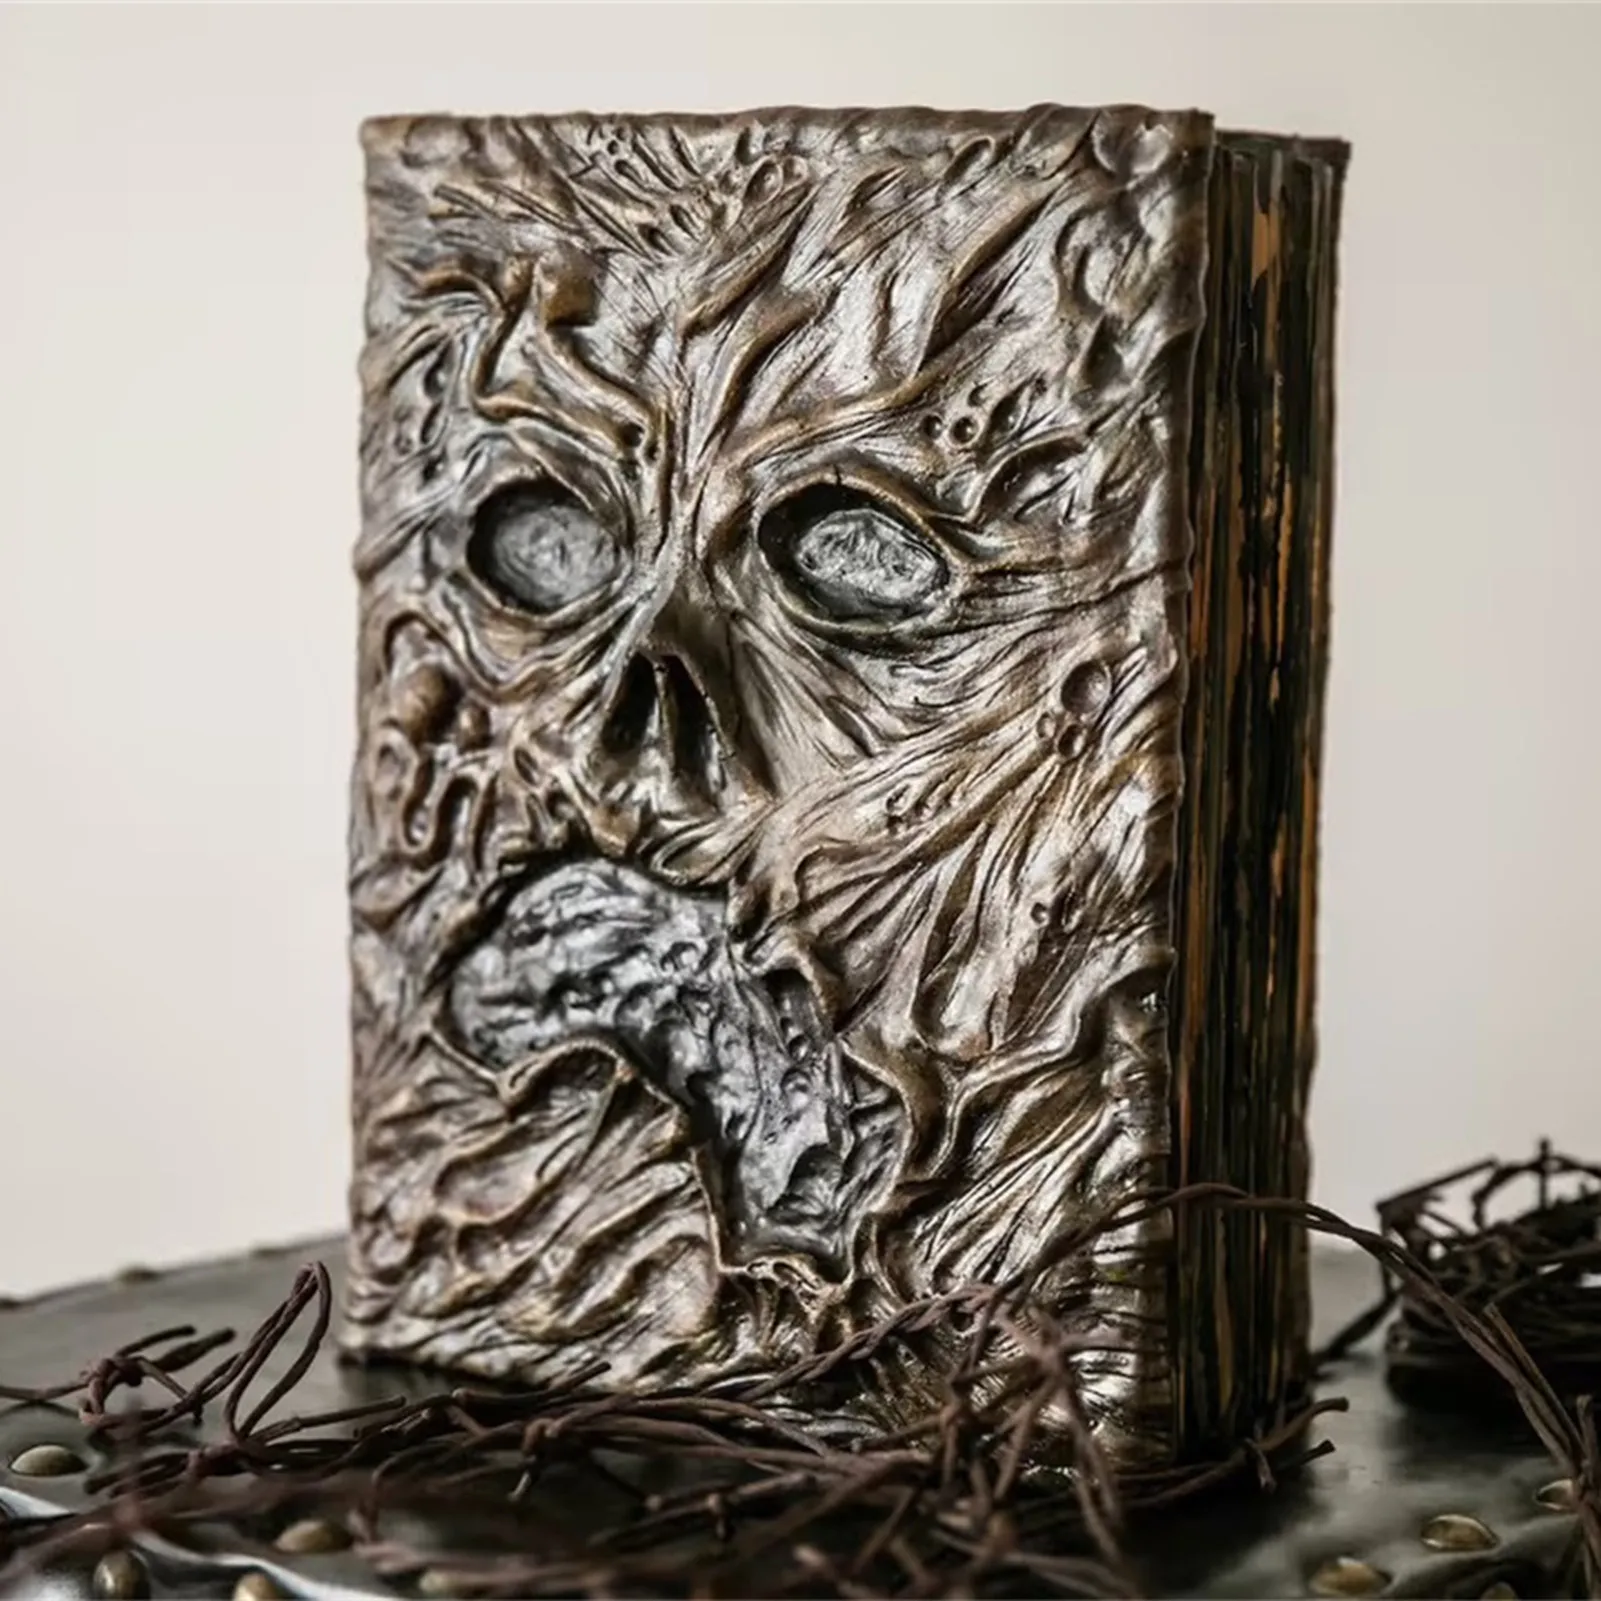 

Necronomicon Evil Dead Book Ornament Resin Book Notebook Decorations Horror Movie Prop Gifts Dead Spell-book for Home Decor